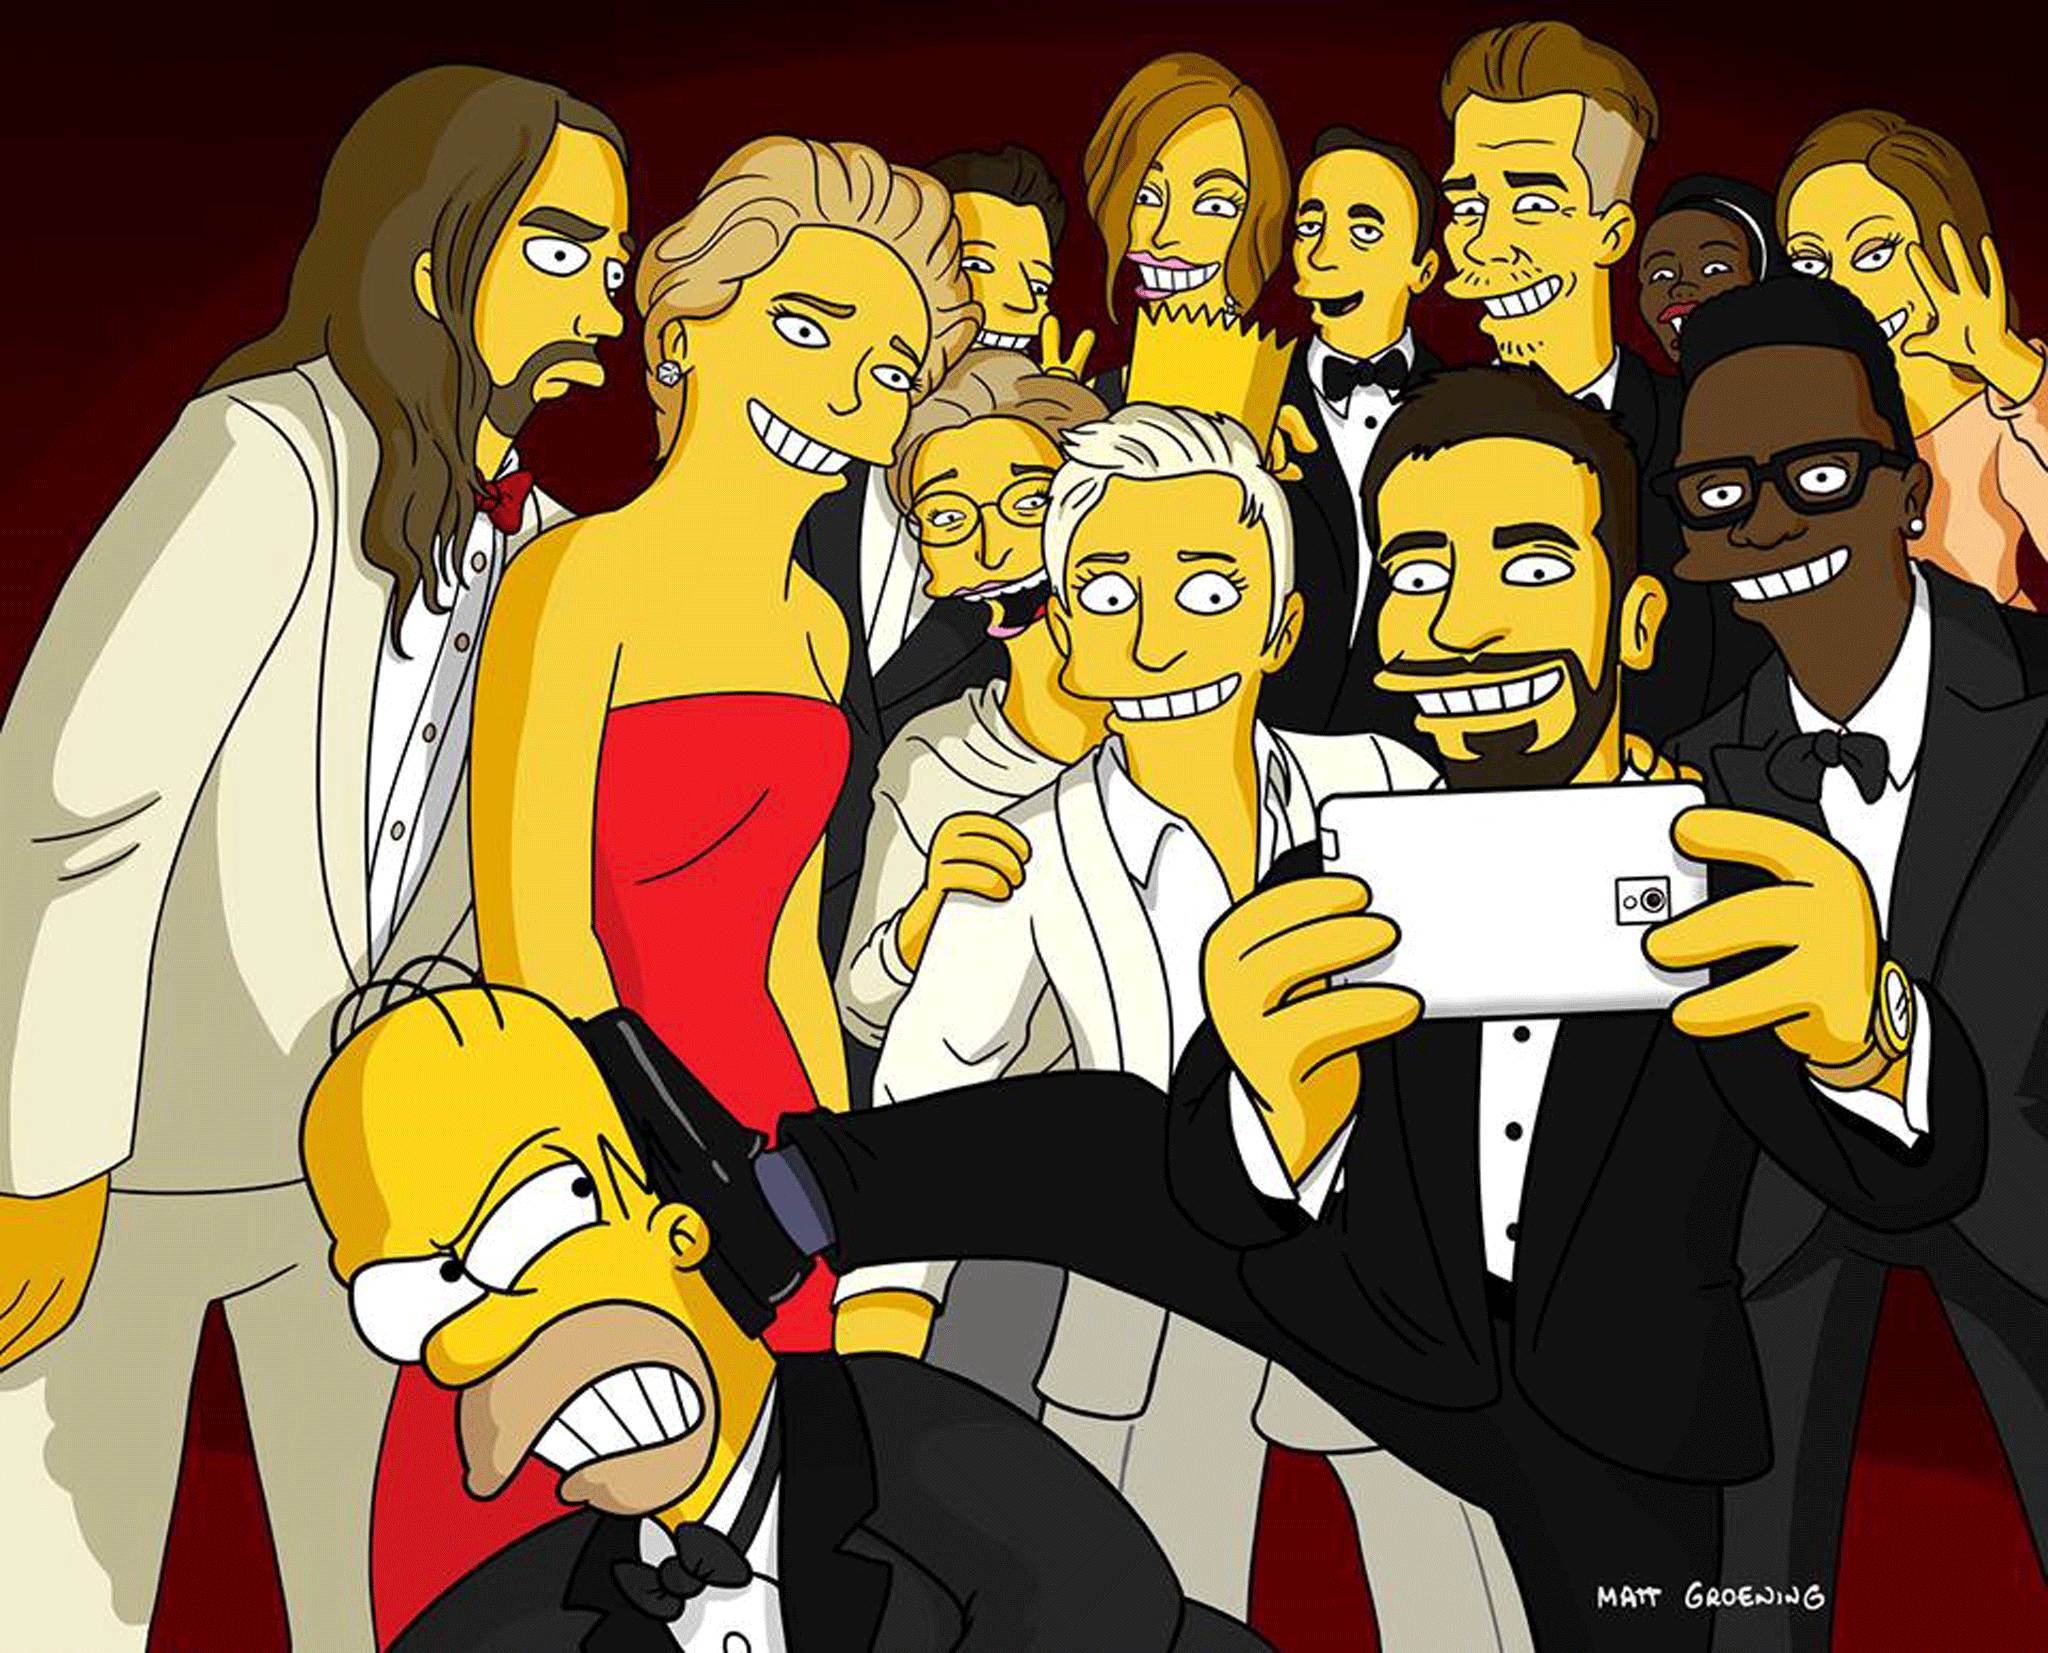 In case you ever wondered what Meryl Streep would look like as a Simpson